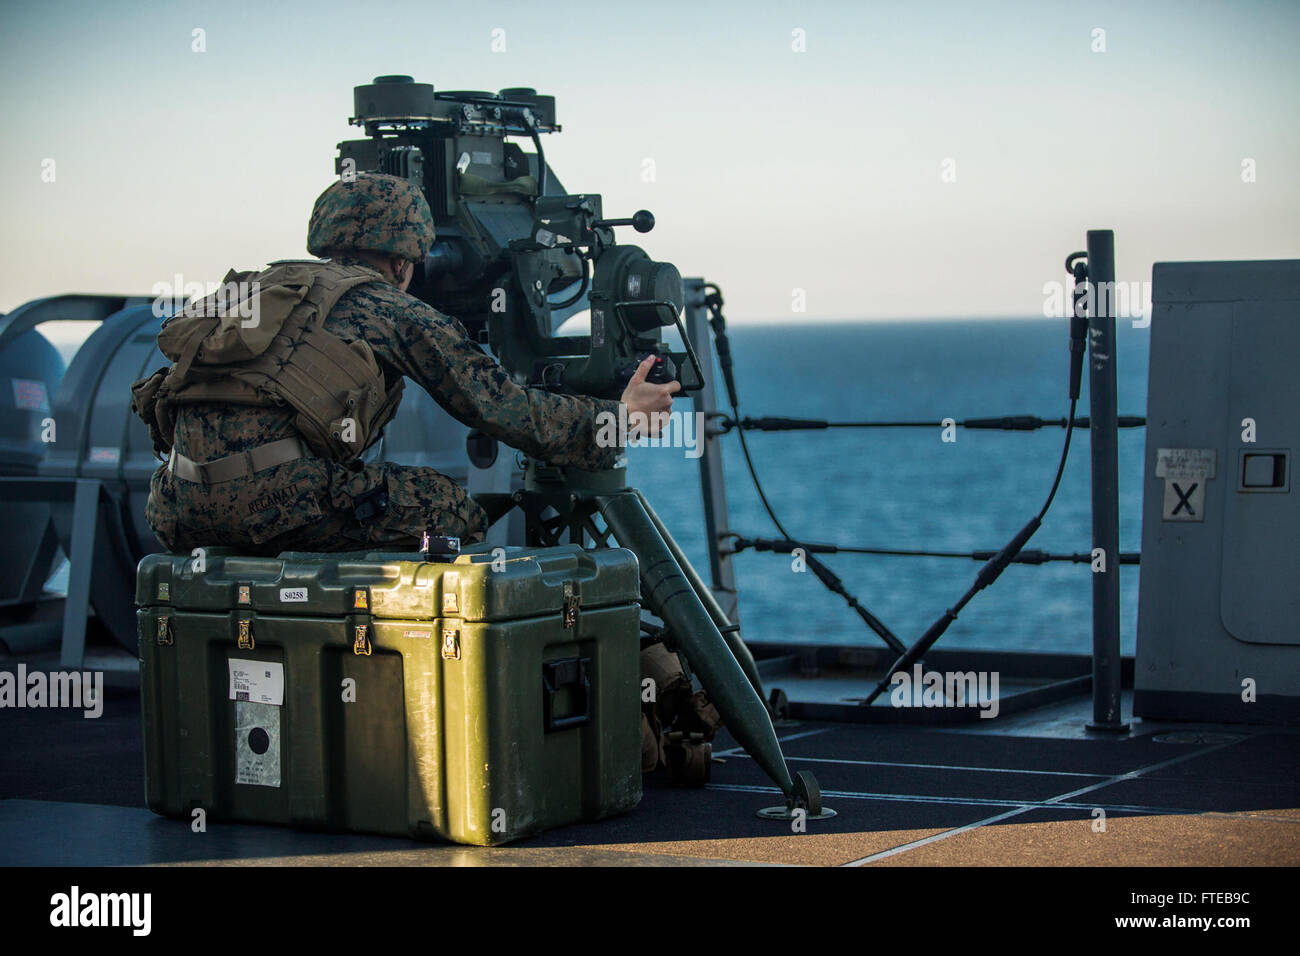 141225-M-YH418-001 Lance Cpl. Ryan Recanati, an anti-tank missileman with Weapons Company, Battalion Landing Team 3rd Battalion, 6th Marine Regiment, 24th Marine Expeditionary Unit, looks through the optics of an M41 Saber System aboard the USS New York, at sea, Dec. 25, 2014. Recanati was part of a defensive posture for the ship as it sailed through the Strait of Gibraltar on its way into the Mediterranean Sea. The Iwo Jima Amphibious Ready Group/24th Marine Expeditionary Unit, is conducting naval operations in the U.S. 6th Fleet area of operations in support of U.S. national security interes Stock Photo